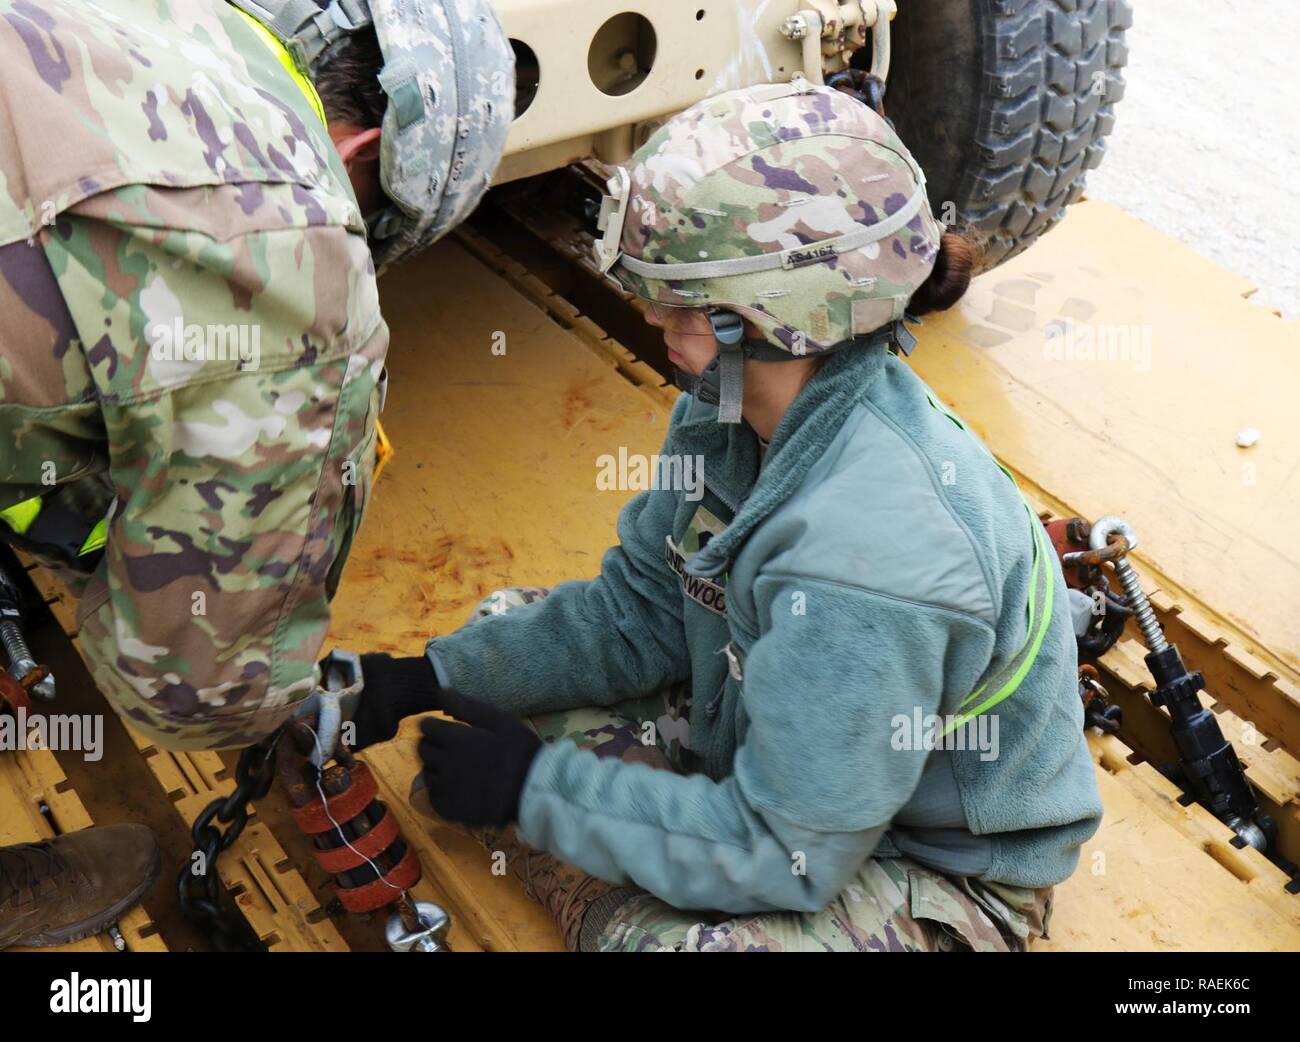 Sgt. Velez, left, and Spc. Underwood, 303rd Military Intelligence Battalion, 504th Military Intelligence Brigade, tie down a vehicle, Dec. 12, 2018, Fort Hood, Texas. They were assisting with rail load operations. Stock Photo